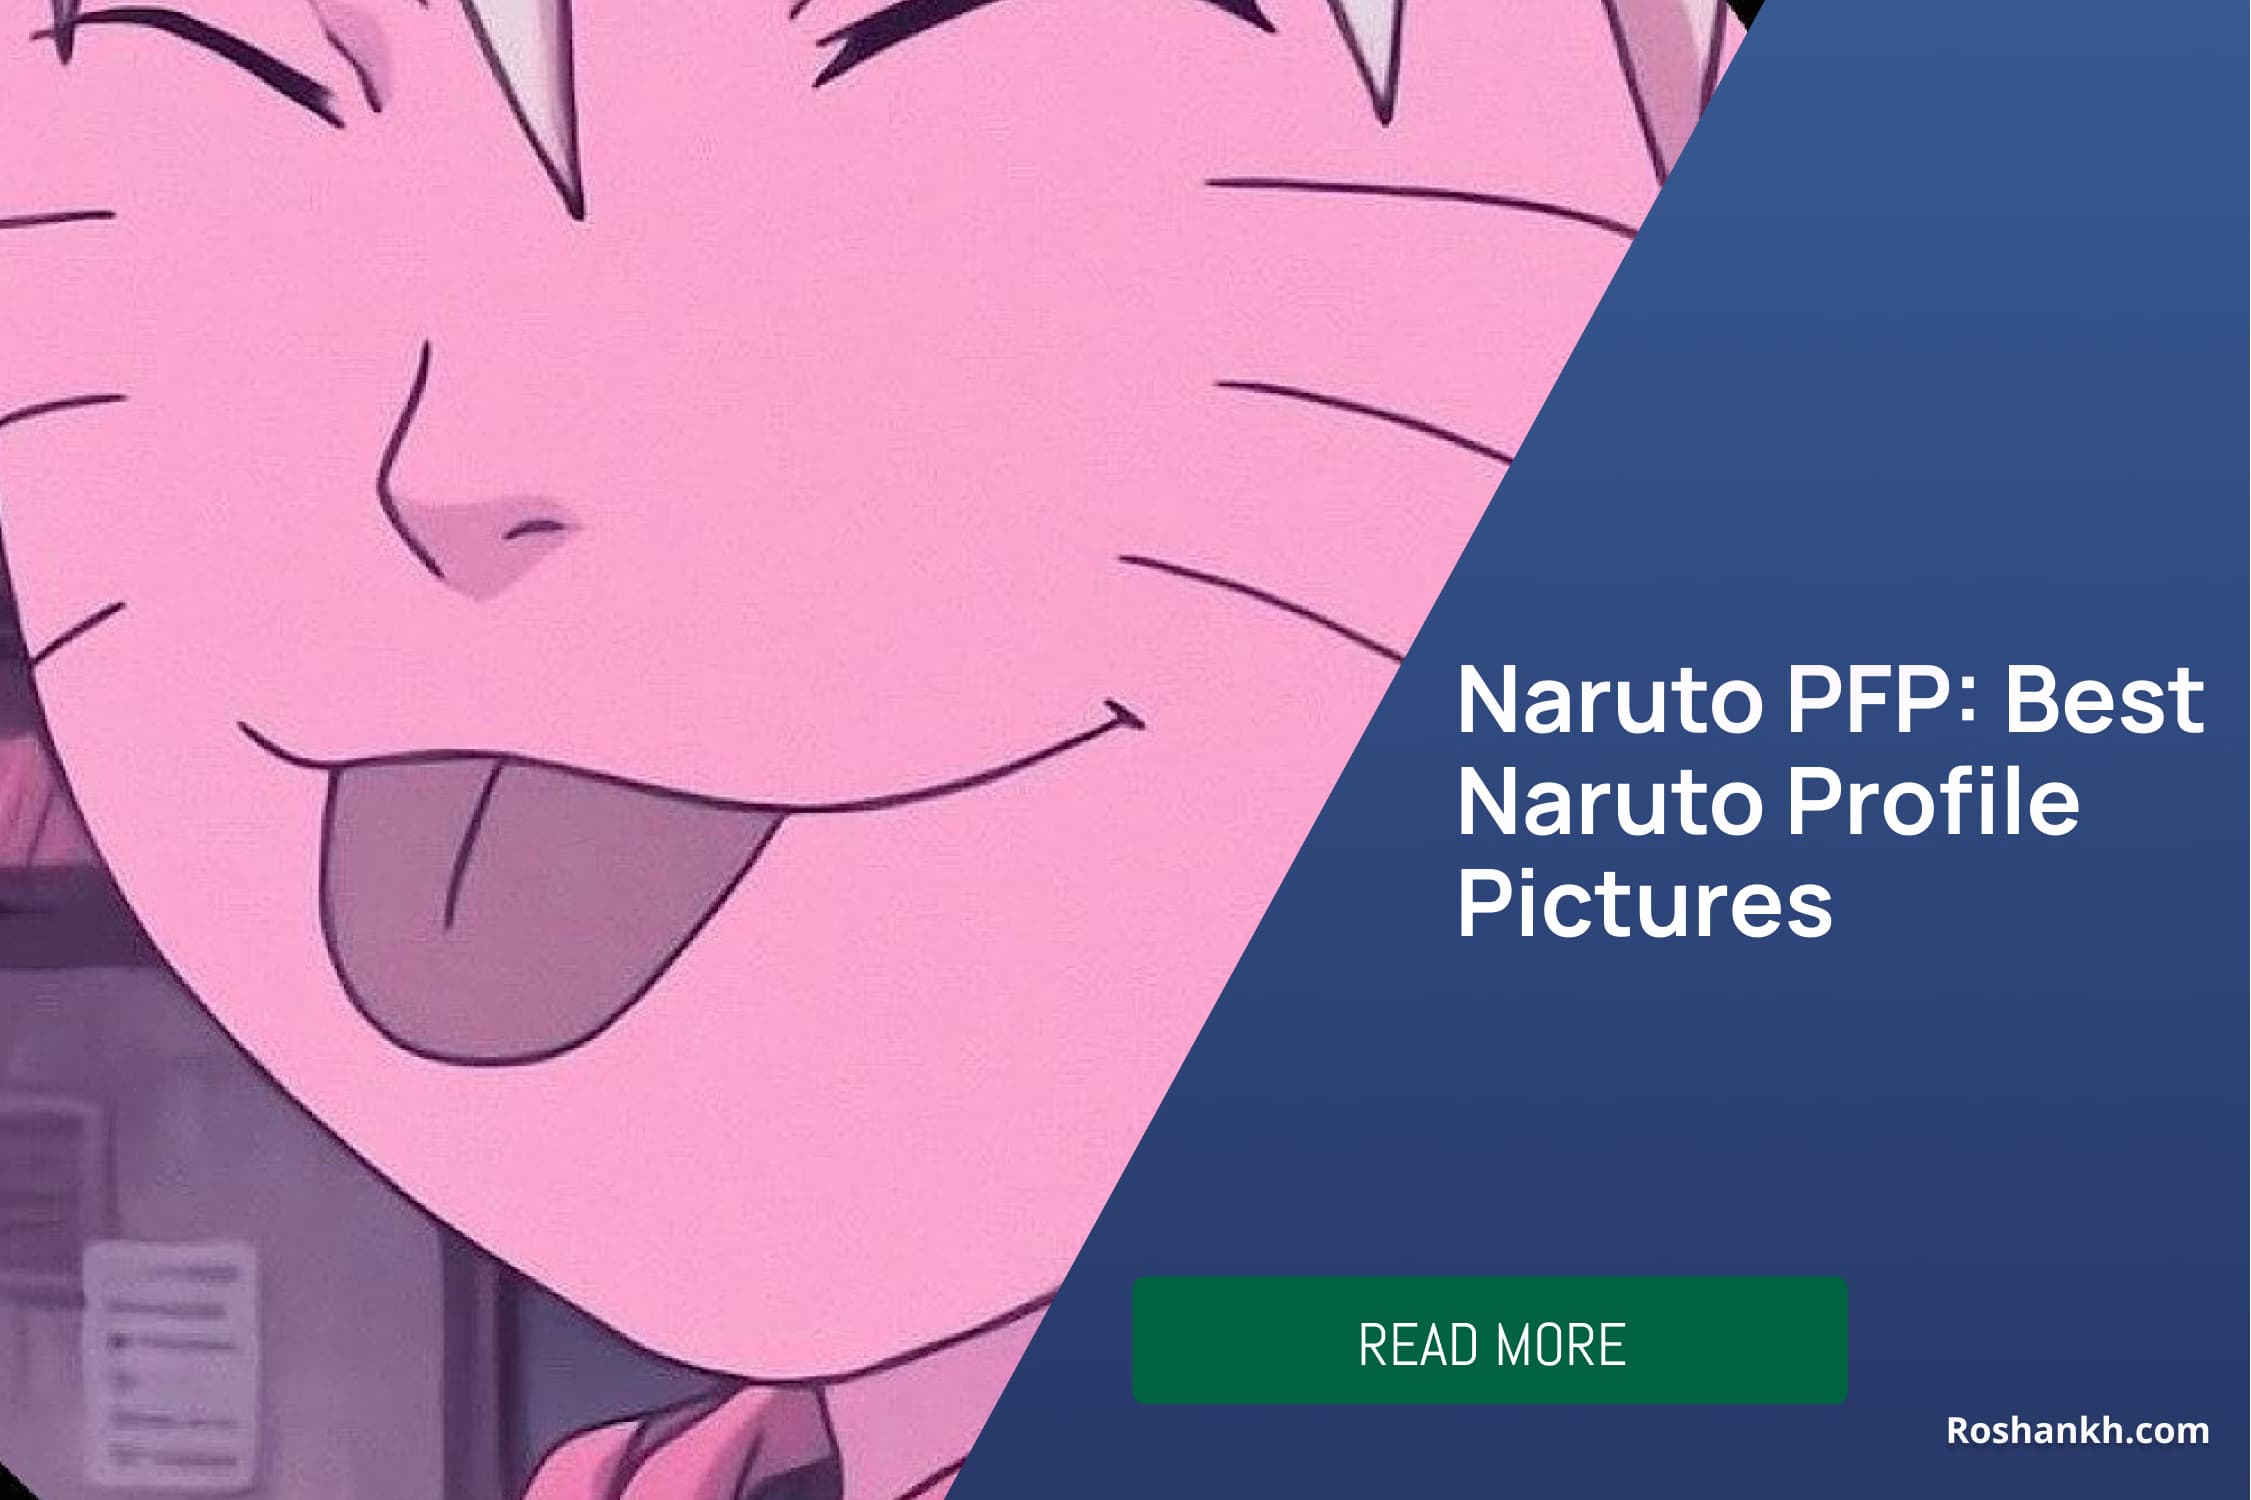 Best Naruto Profile Pictures